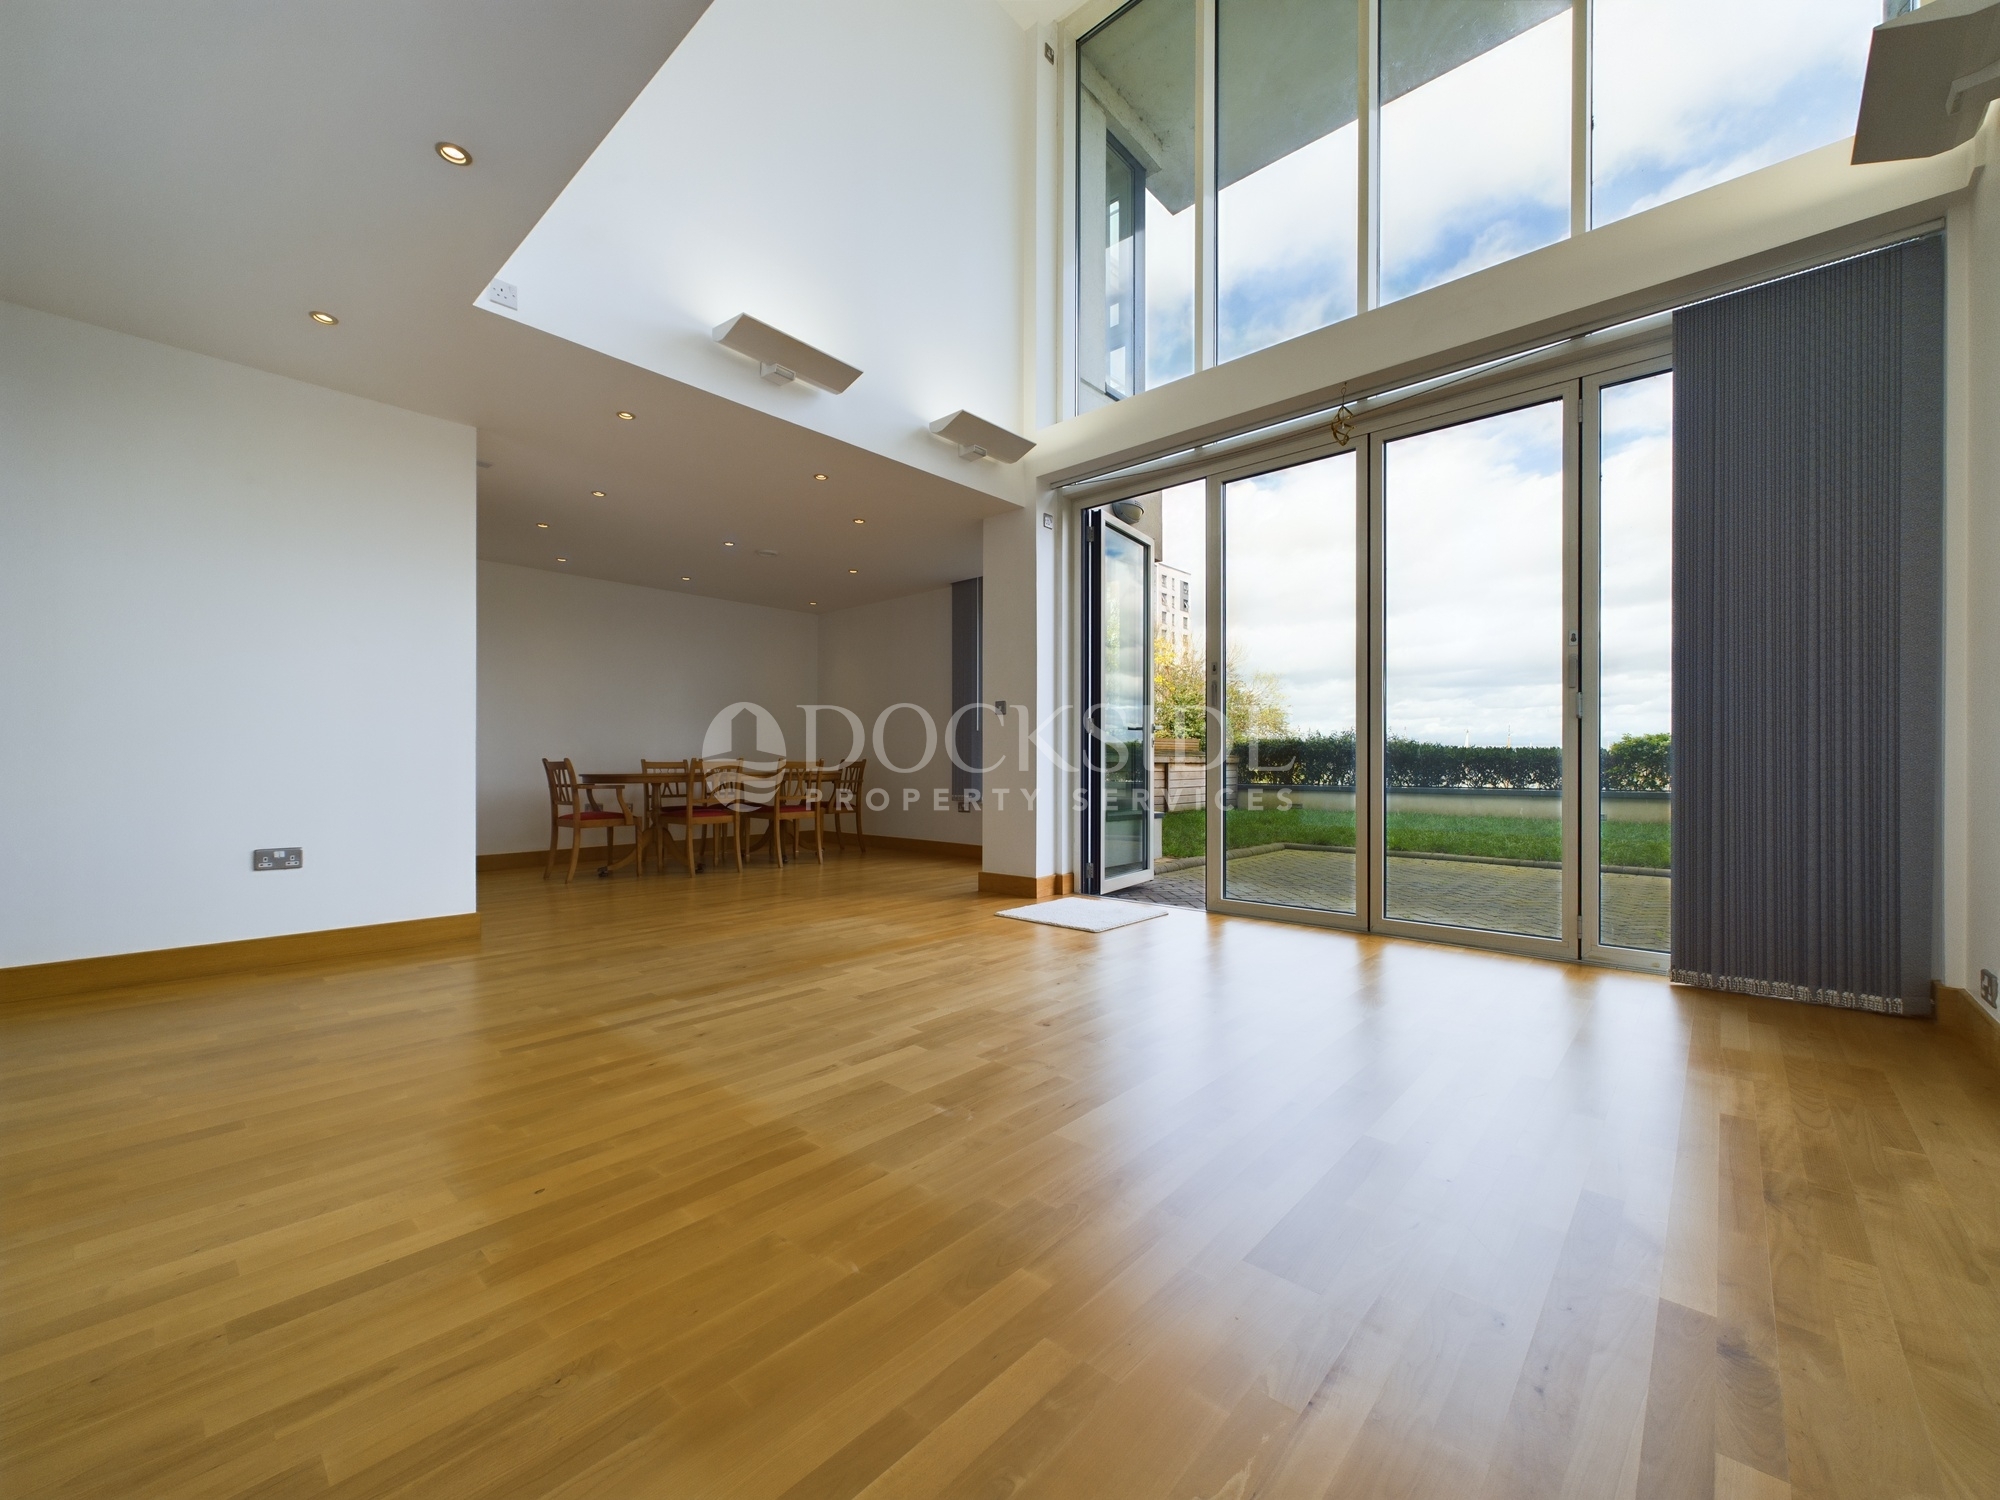 5 bed to rent in Pier Road, Gillingham  - Property Image 2